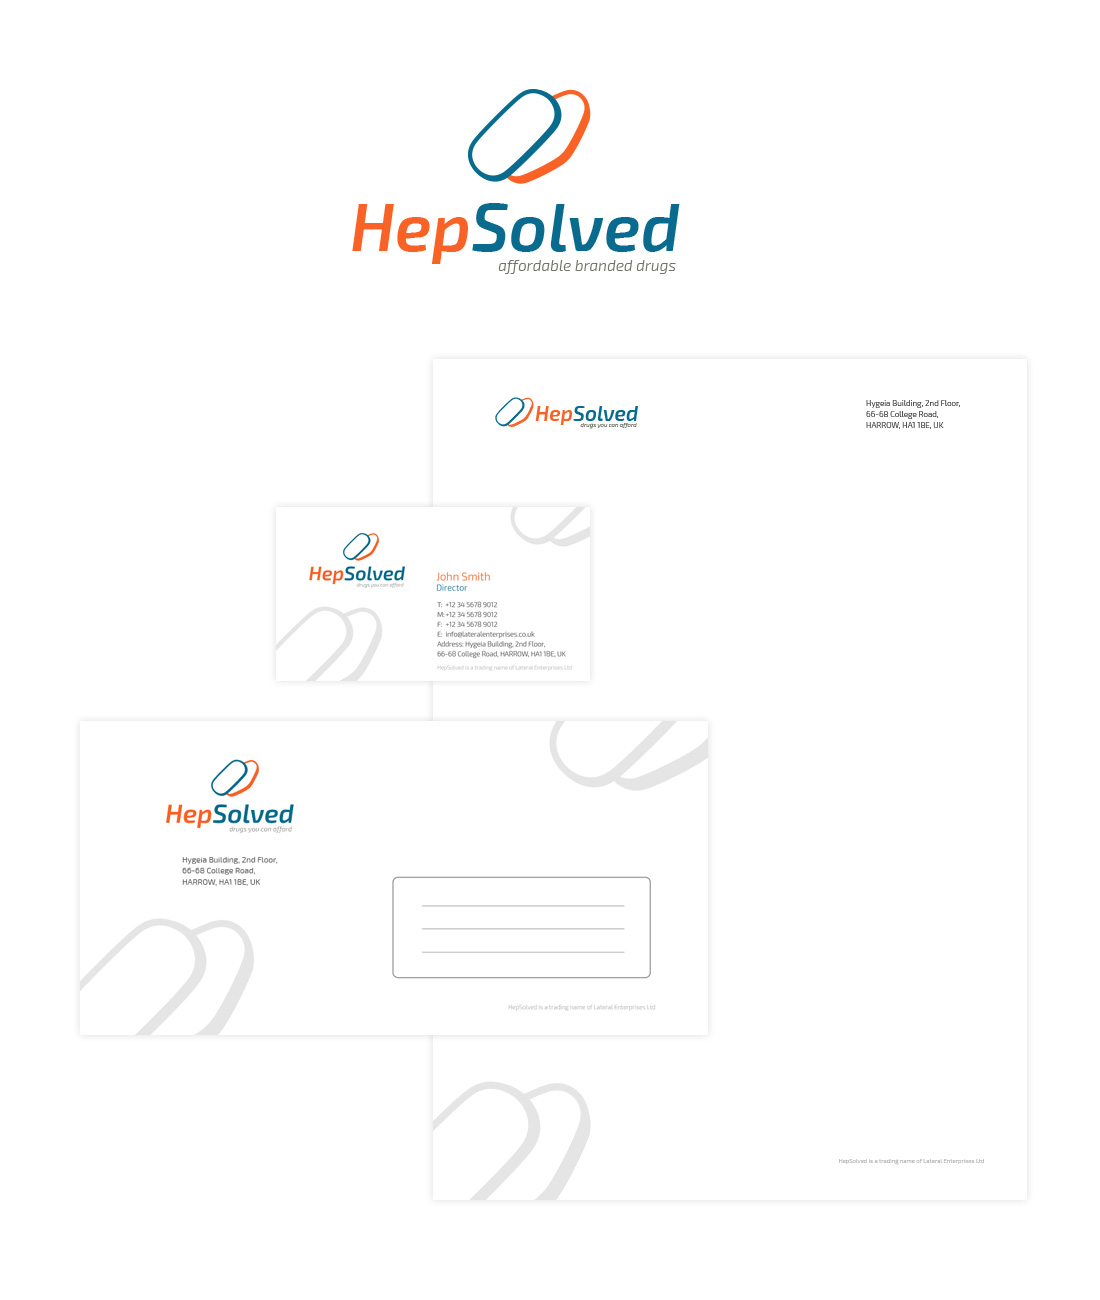 Logo design and corporate identity design for HepSolved company